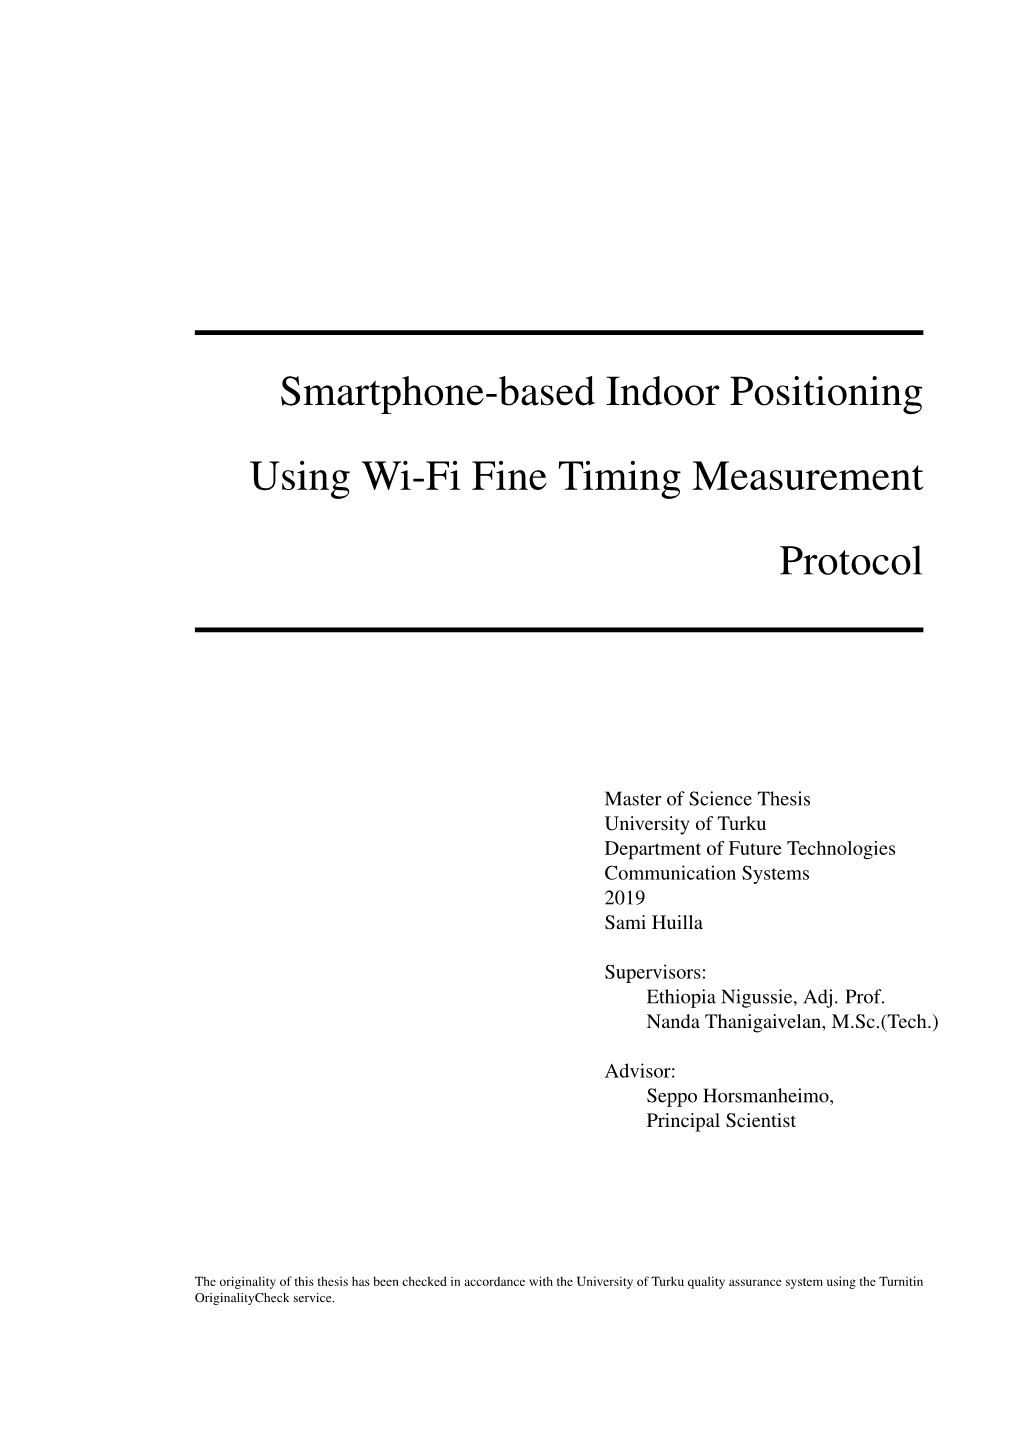 Smartphone-Based Indoor Positioning Using Wi-Fi Fine Timing Measurement Protocol